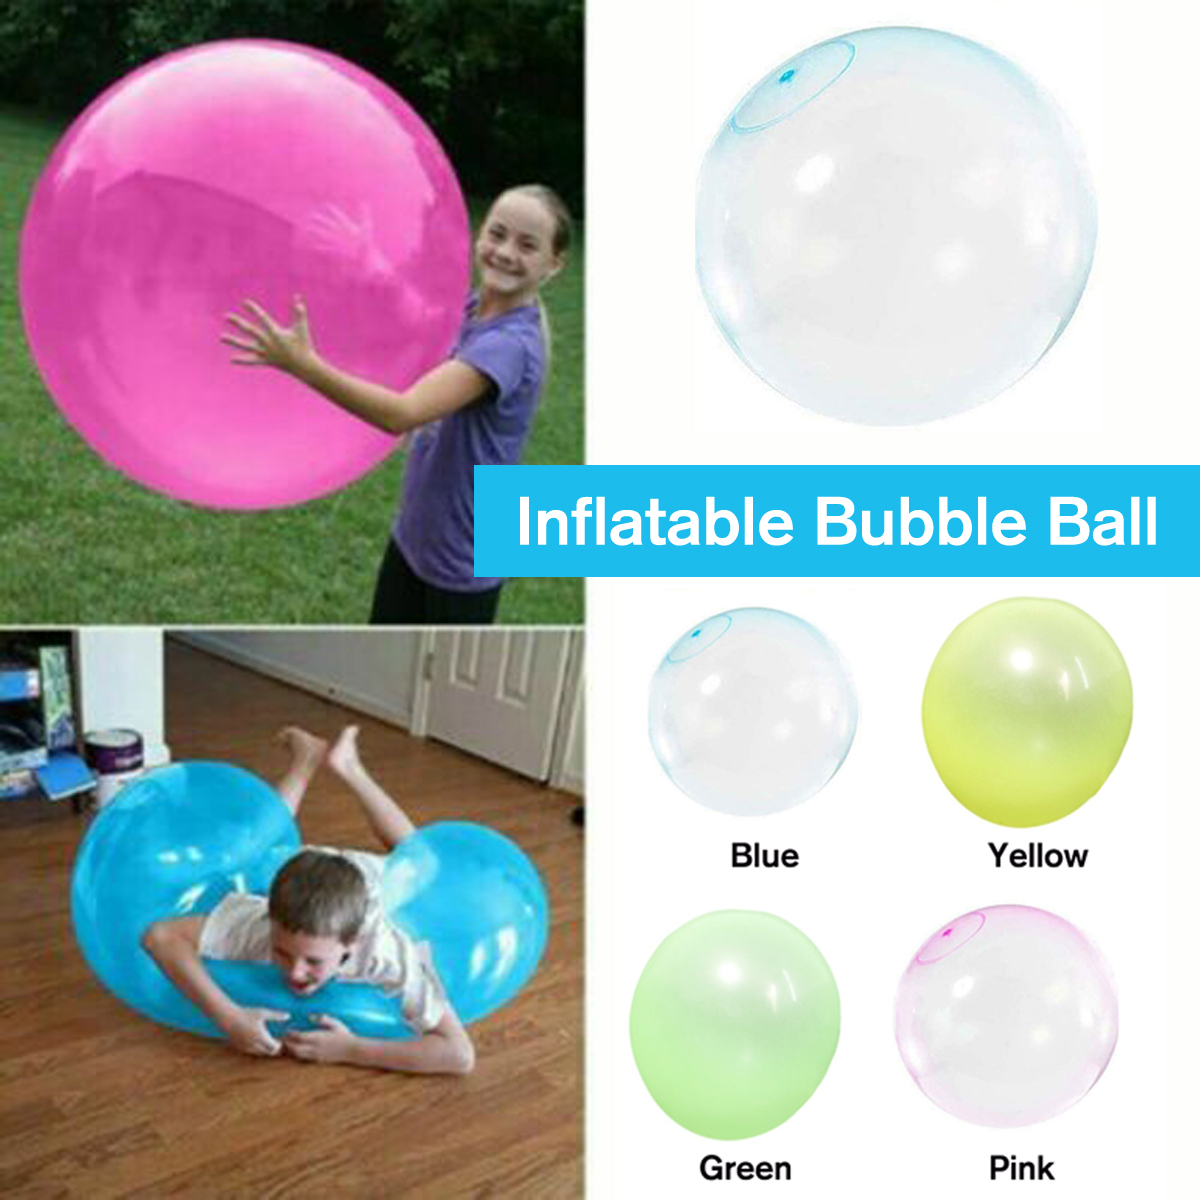 120CM-Multi-color-Bubble-Ball-Inflatable-Filling-Water-Giant-Ball-Toys-for-Kids-Play-Gift-1891654-1